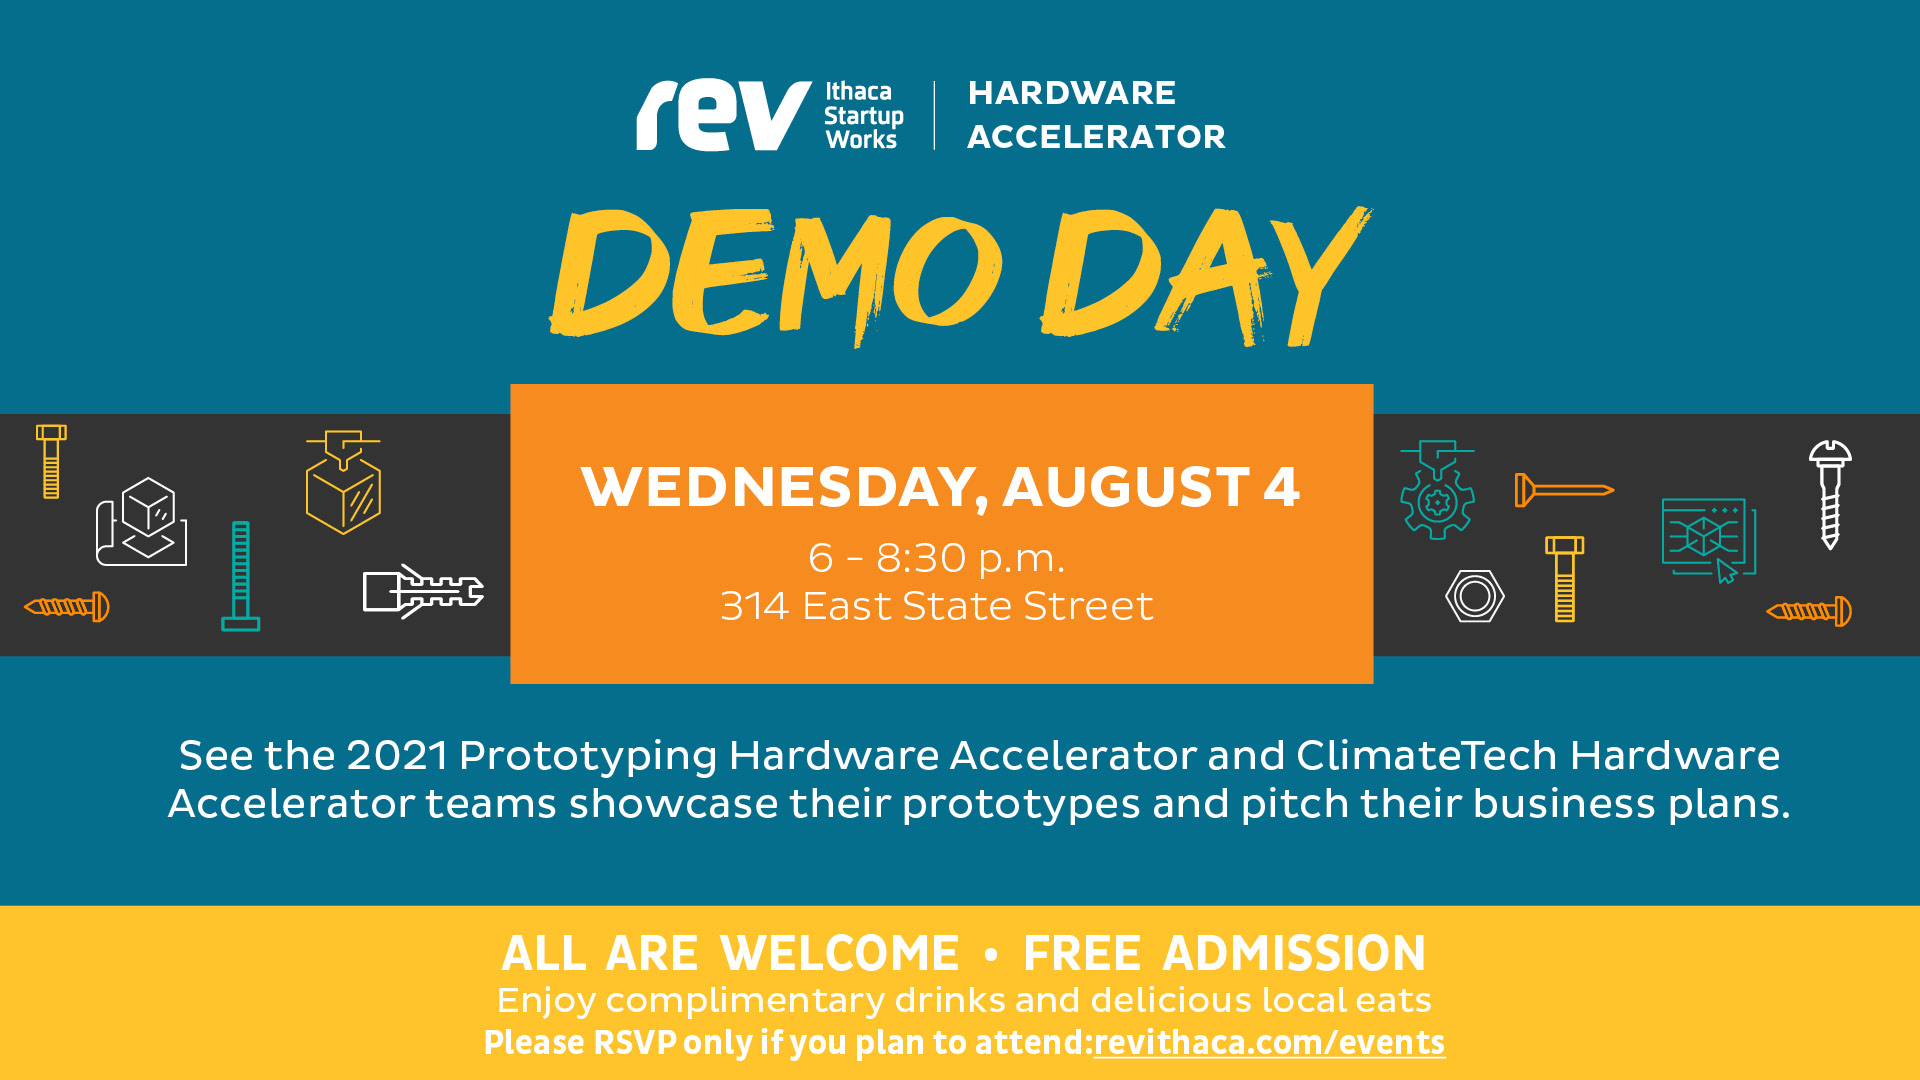 Rev Hardware Accelerator Demo Day, Wednesday, August 4, 6-8 p.m.